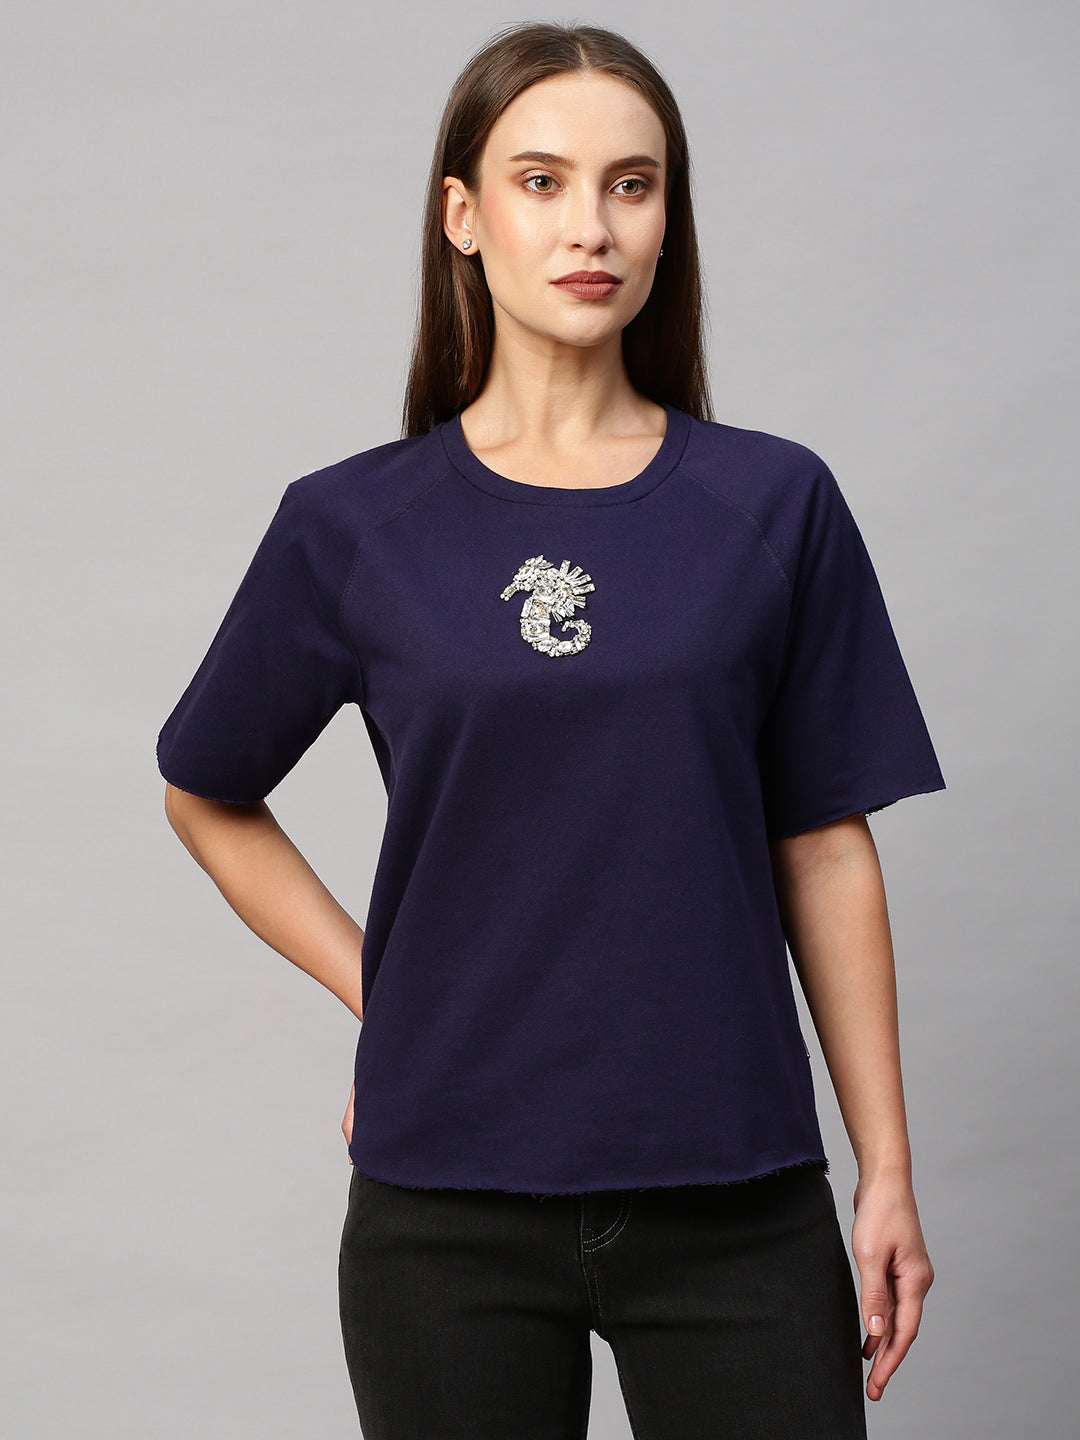 French Terry Raglan Sleeved Sweatshirt With "Sea-Horse" Embroidery